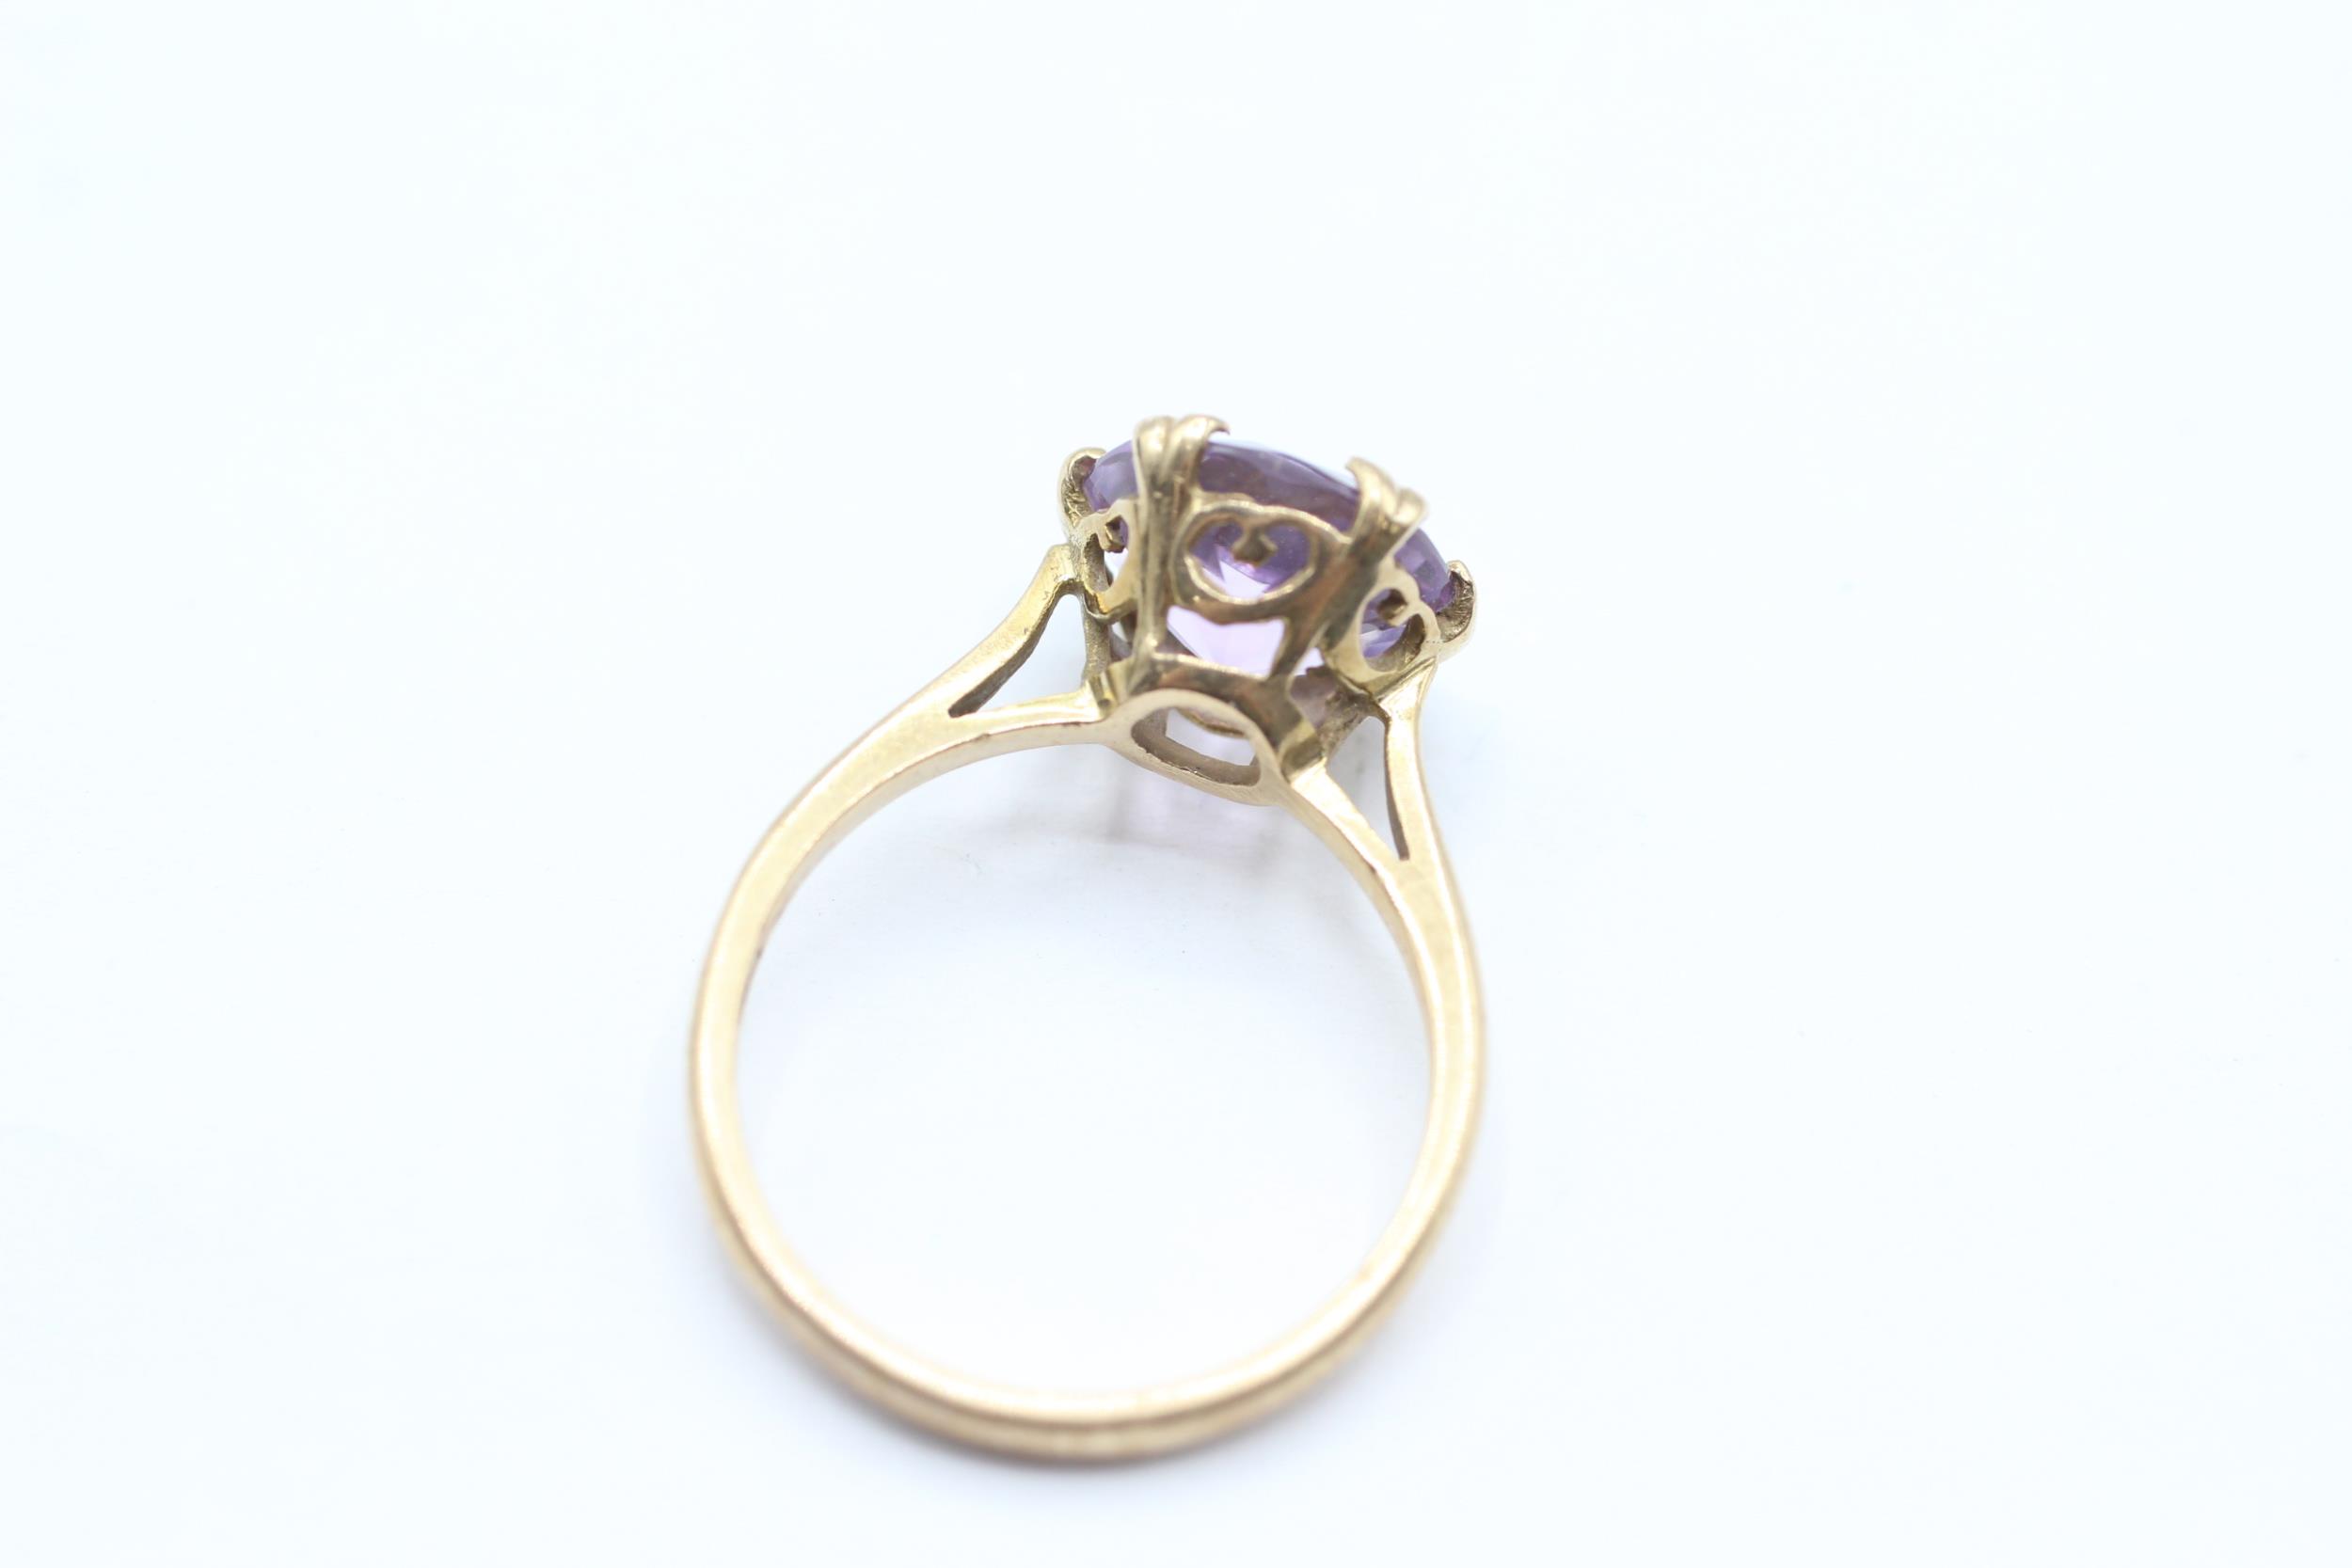 9ct gold vintage amethyst dress ring with a heart patterned gallery. Hallmarked Edinburgh 1968 - Image 4 of 4